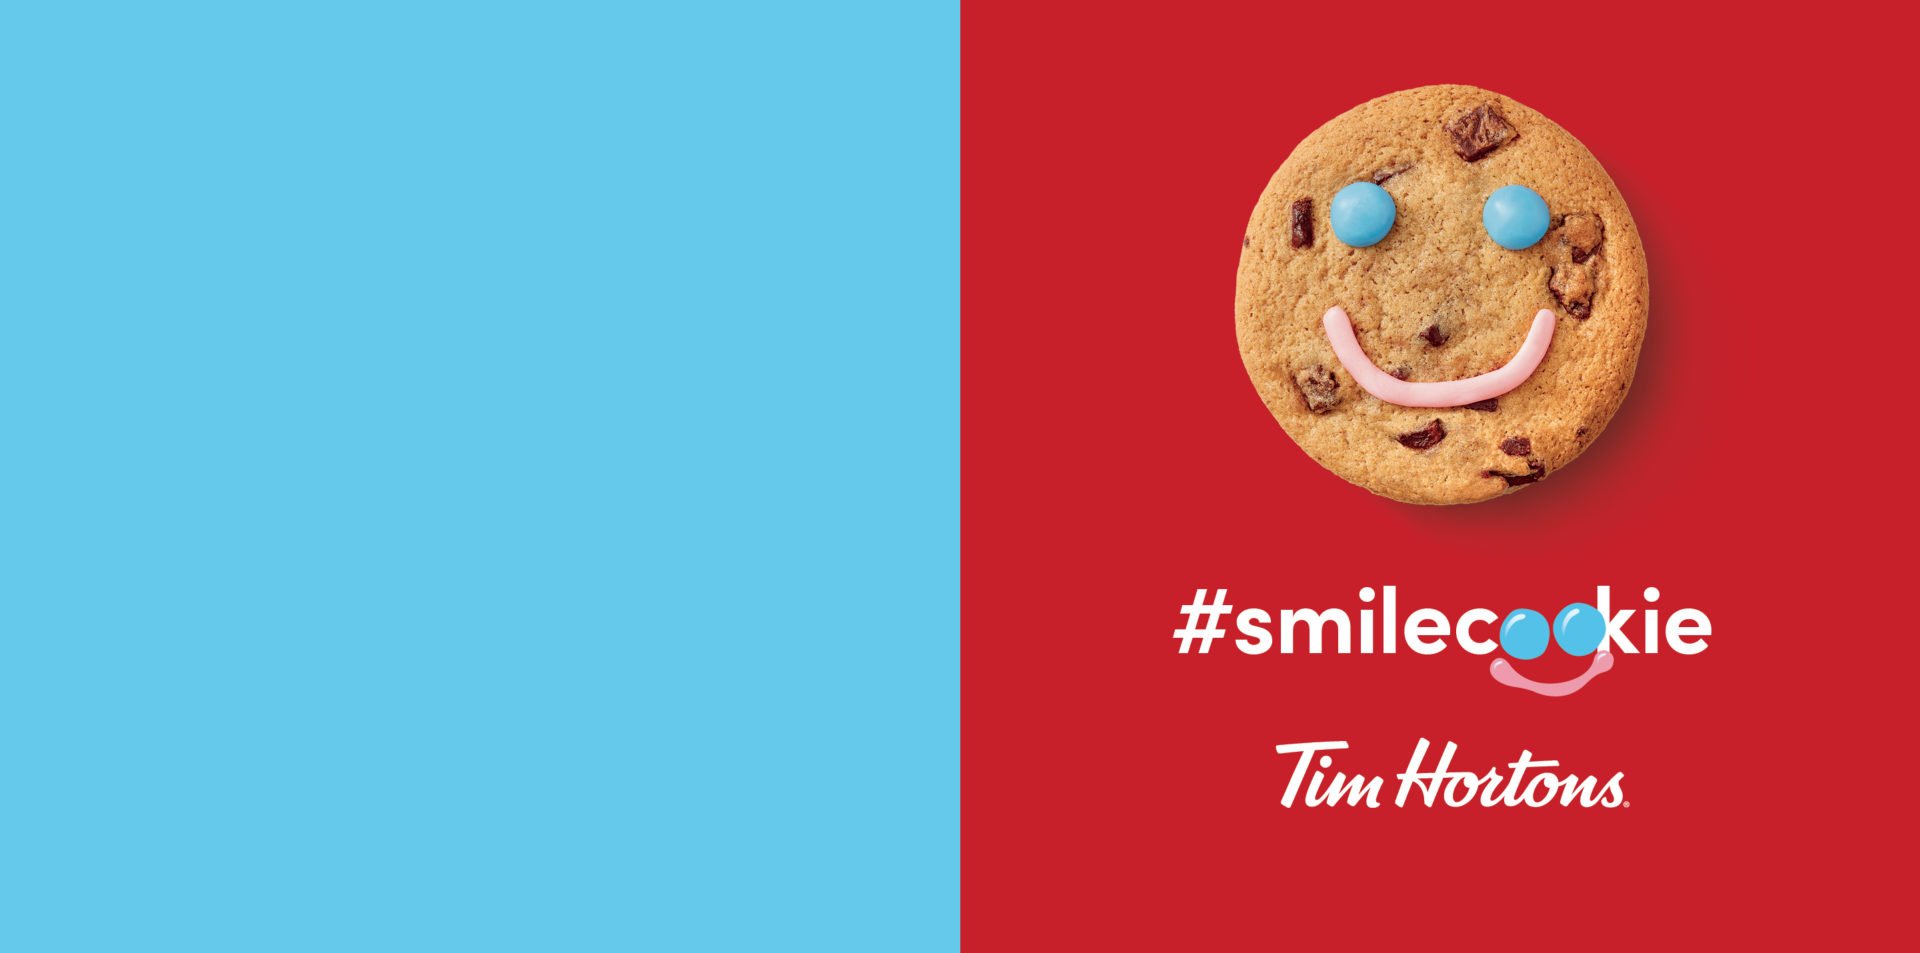 Buy a Smile Cookie